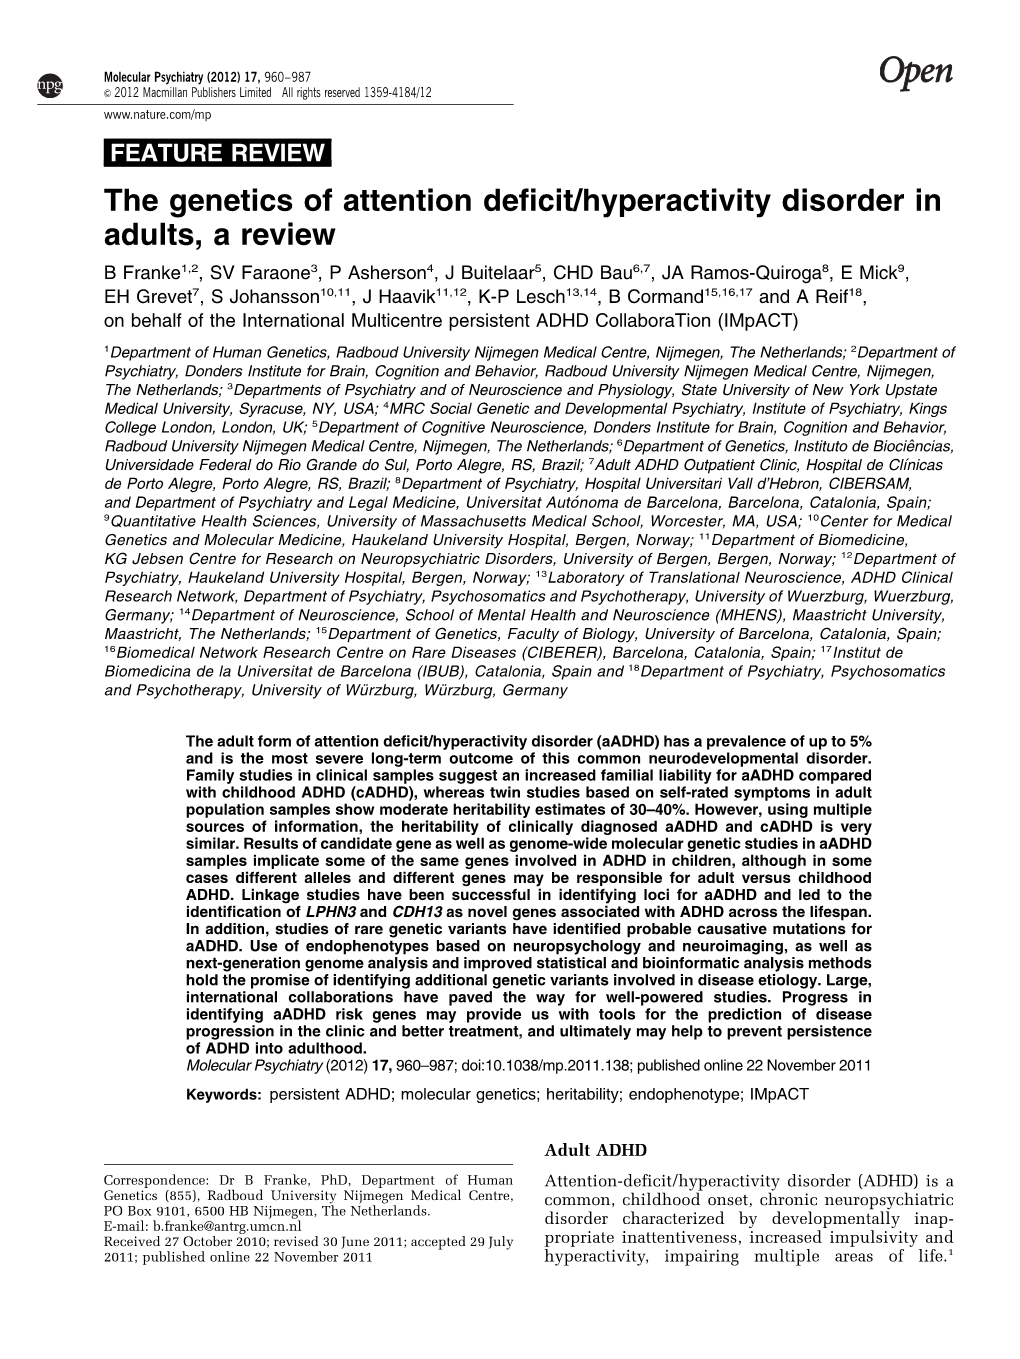 Hyperactivity Disorder in Adults, a Review